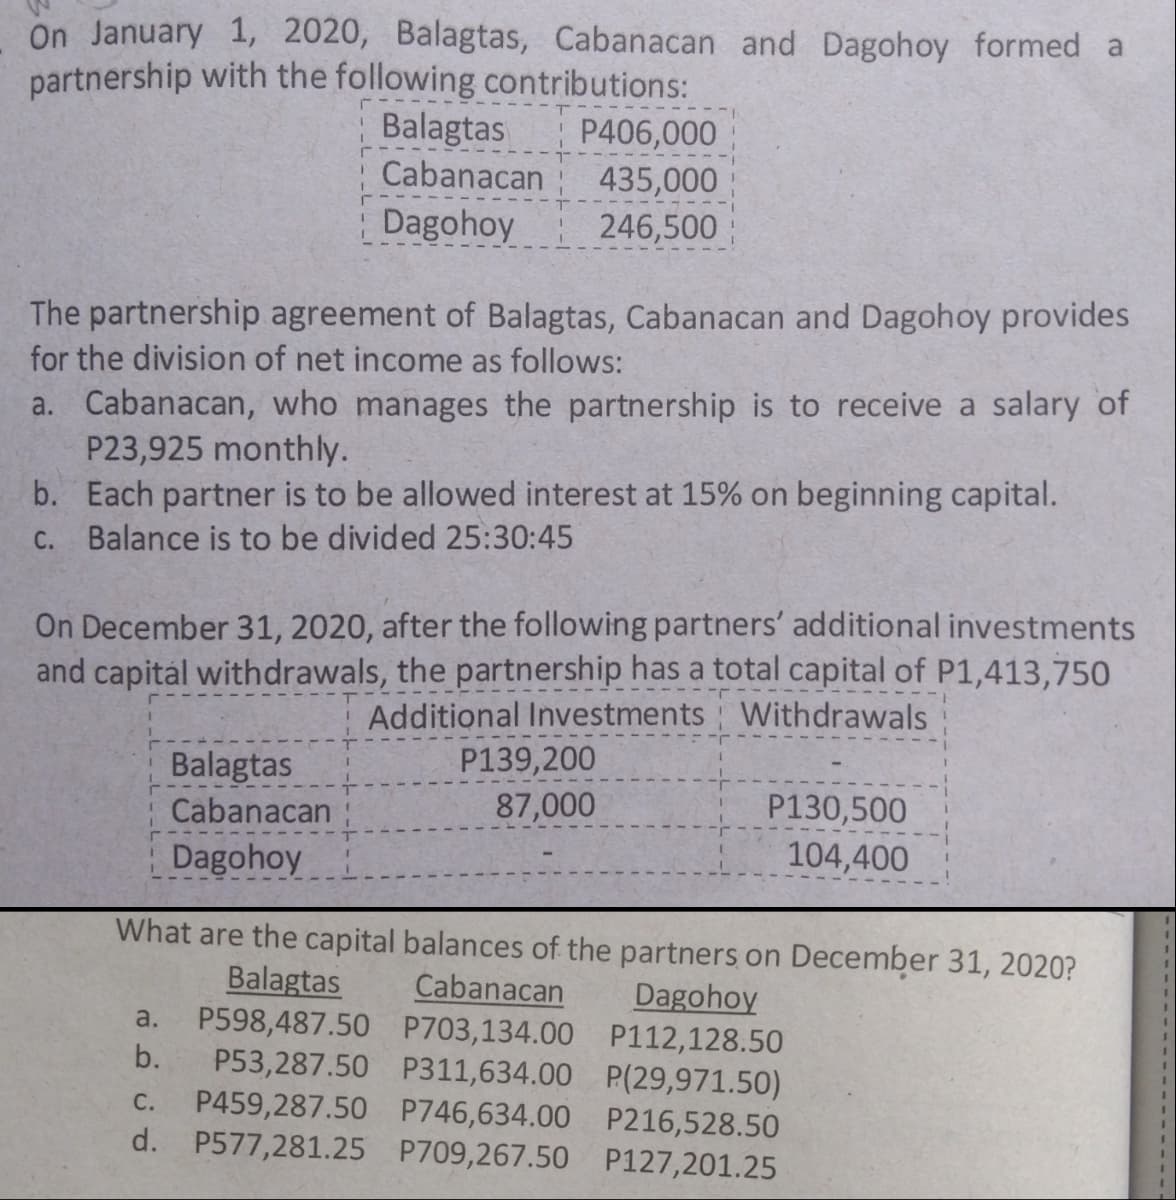 On January 1, 2020, Balagtas, Cabanacan and Dagohoy formed a
partnership with the following contributions:
Balagtas
P406,000
435,000
246,500
Cabanacan
Dagohoy
The partnership agreement of Balagtas, Cabanacan and Dagohoy provides
for the division of net income as follows:
a. Cabanacan, who manages the partnership is to receive a salary of
P23,925 monthly.
b. Each partner is to be allowed interest at 15% on beginning capital.
C. Balance is to be divided 25:30:45
On December 31, 2020, after the following partners' additional investments
and capitál withdrawals, the partnership has a total capital of P1,413,750
Additional Investments Withdrawals
P139,200
Balagtas
87,000
P130,500
104,400
Cabanacan
Dagohoy
What are the capital balances of the partners on December 31, 2020?
Balagtas
P598,487.50 P703,134.00 P112,128.50
b.
Cabanacan
Dagohoy
a.
P53,287.50 P311,634.00 P(29,971.50)
P459,287.50 P746,634.00 P216,528.50
d. P577,281.25 P709,267.50 P127,201.25
С.
------.
